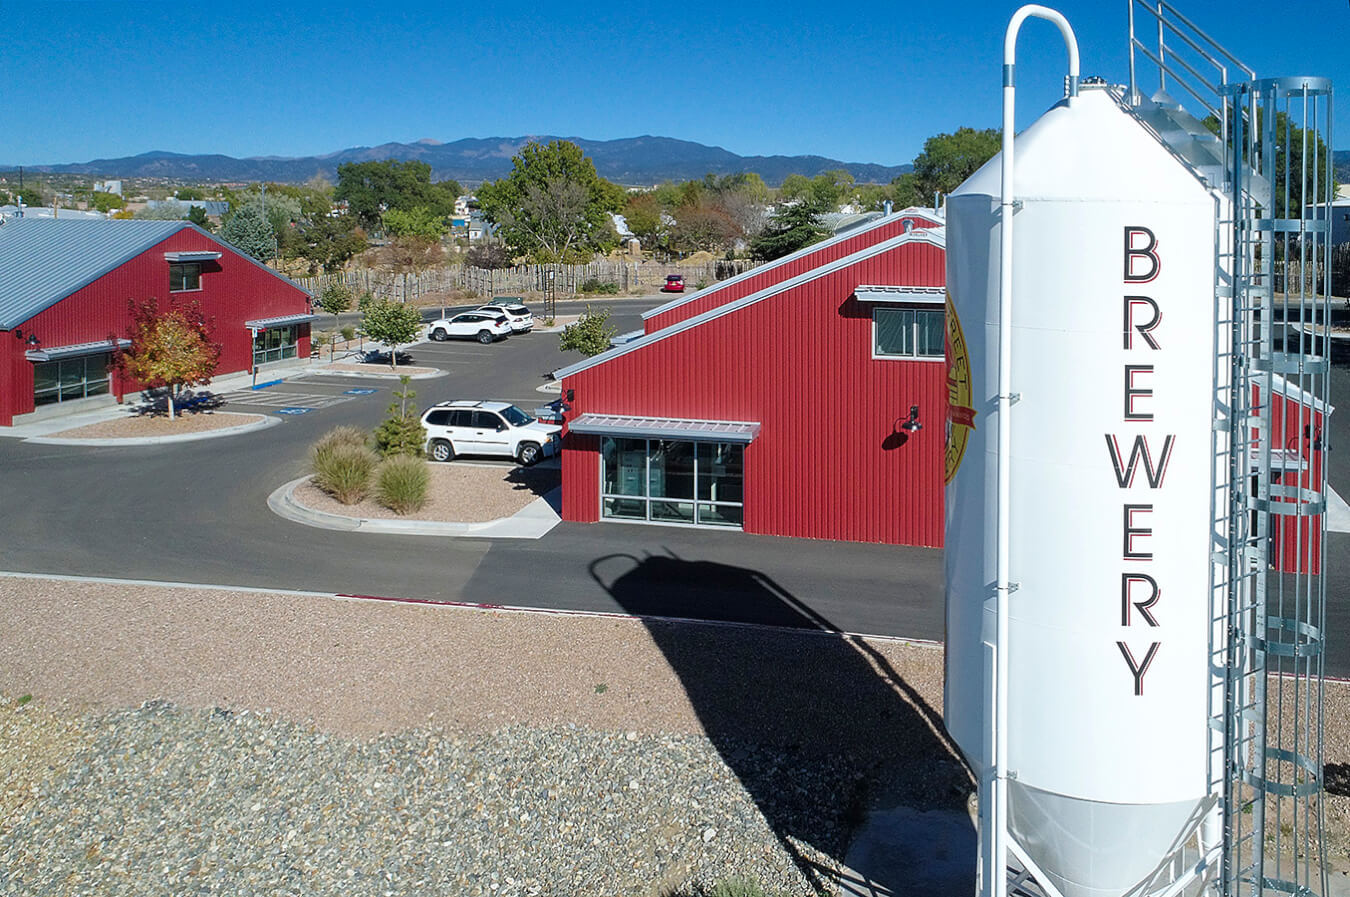 An aerial view of a brewery in Santa Fe.